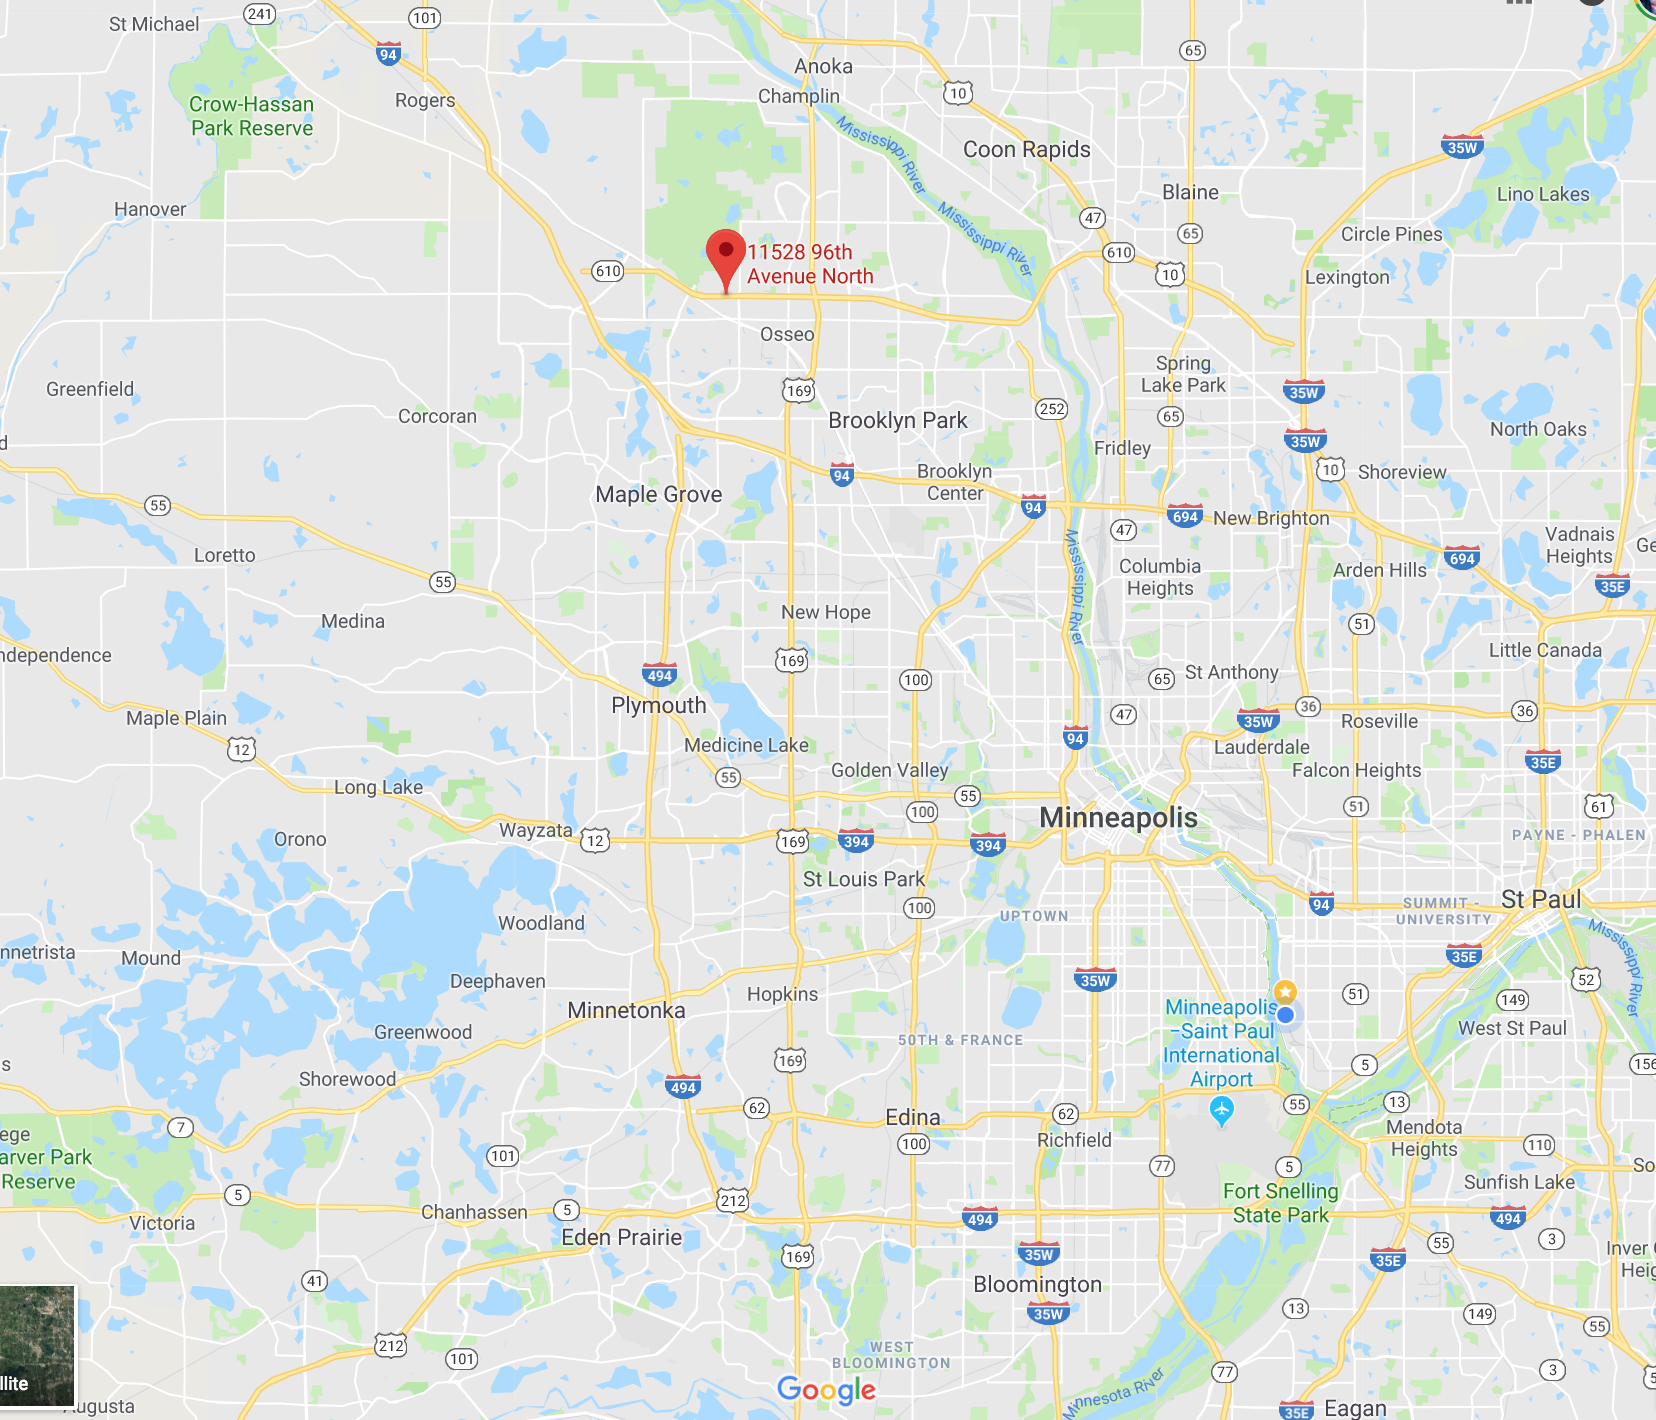 Directions To Cloud Nine Dog Training School and Event Center in Minnesota